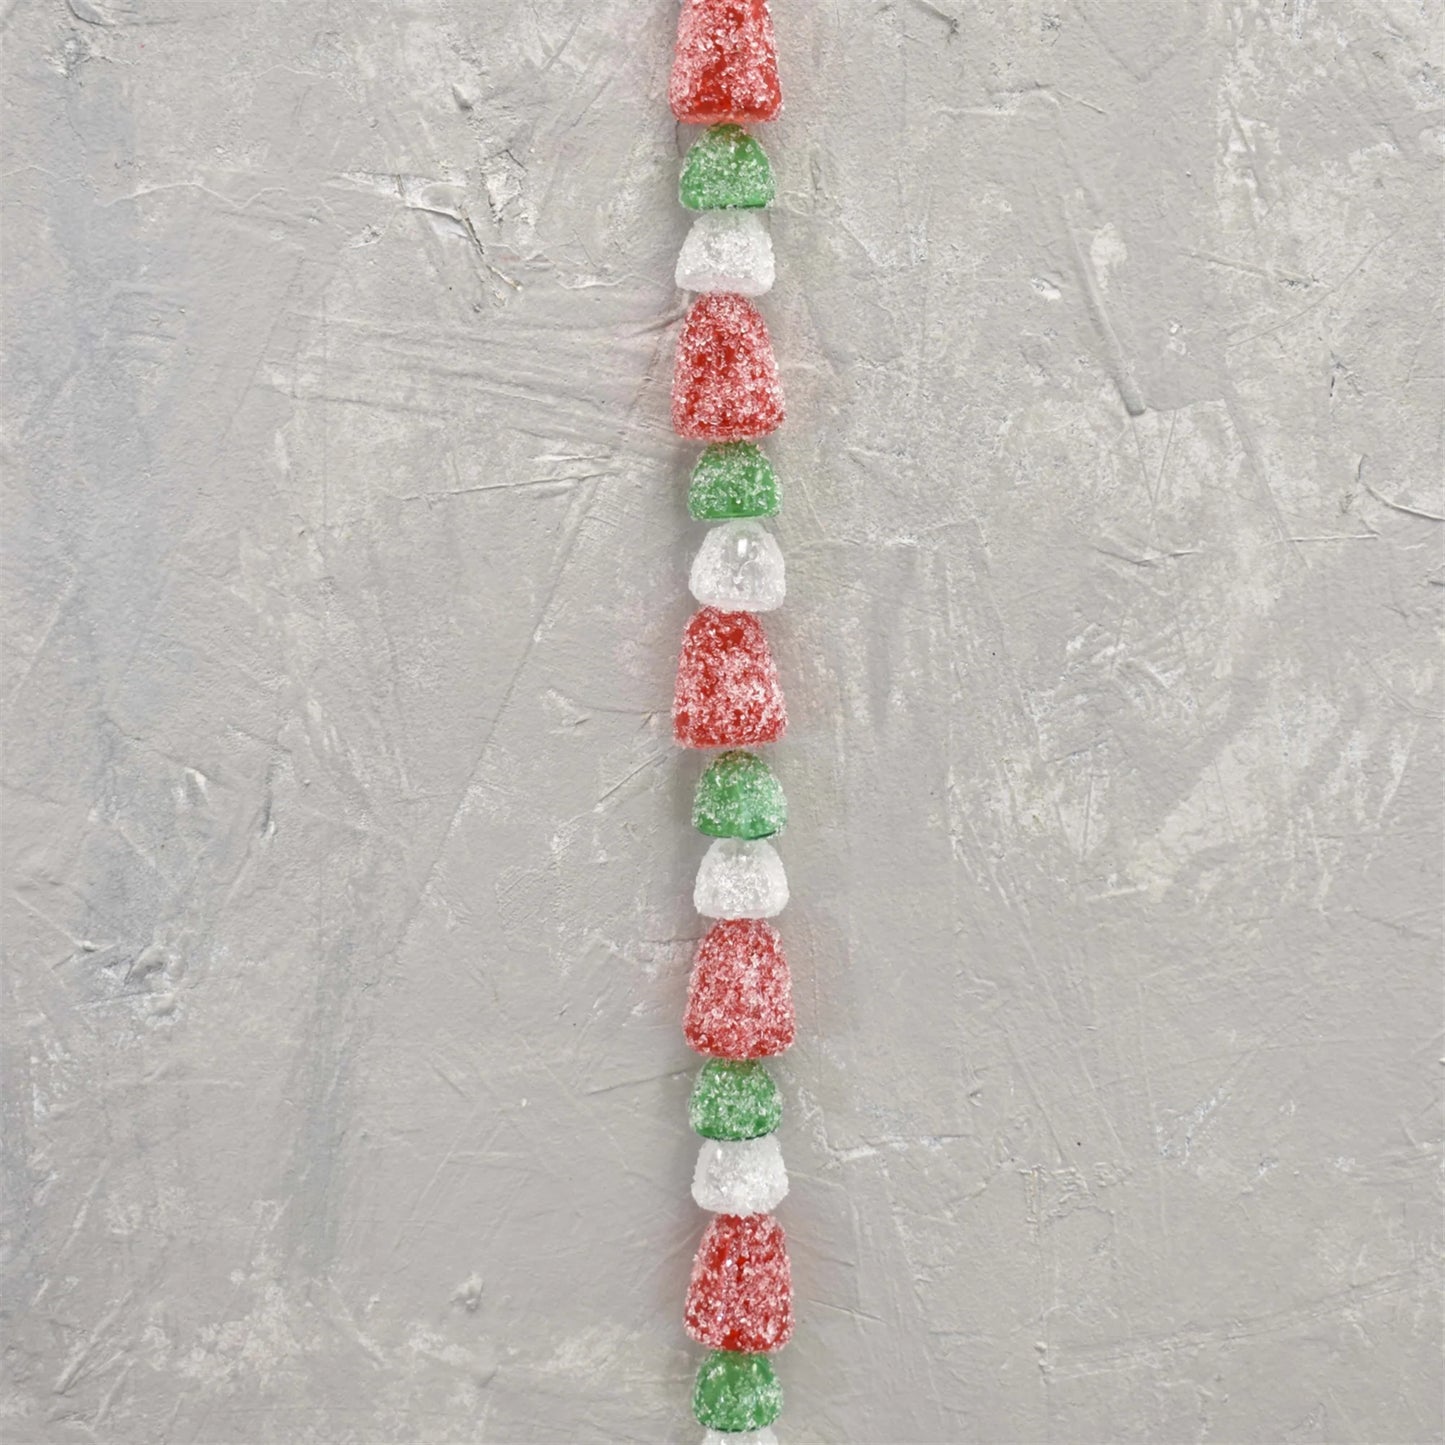 Gum Drop Candy And Ball Garland - Red White Green 72"